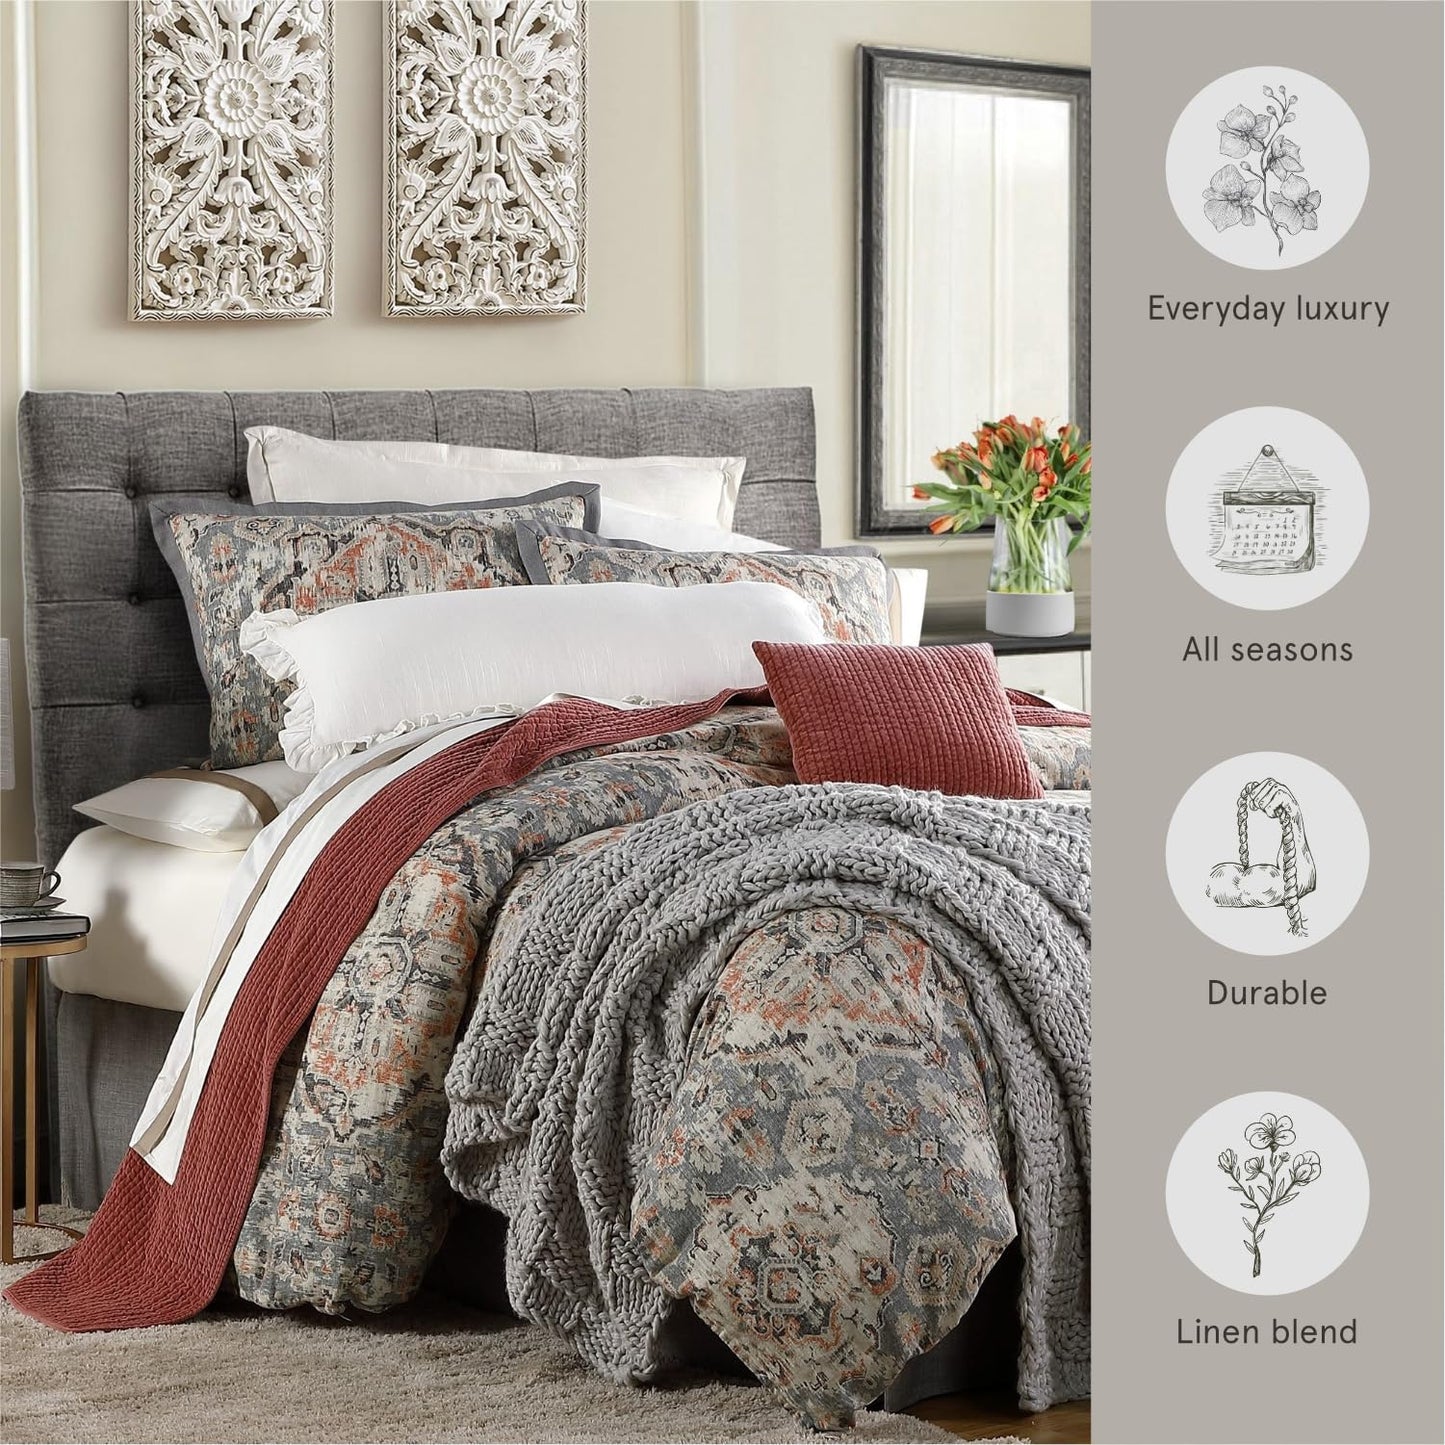 HiEnd Accents Carmen Kilim 3 Piece Comforter Set with Pillow Shams, Gray Medallion, Super King Size, Modern, Traditional, Rustic Style Luxury Bedding Set, 1 Comforter and 2 Pillowcases